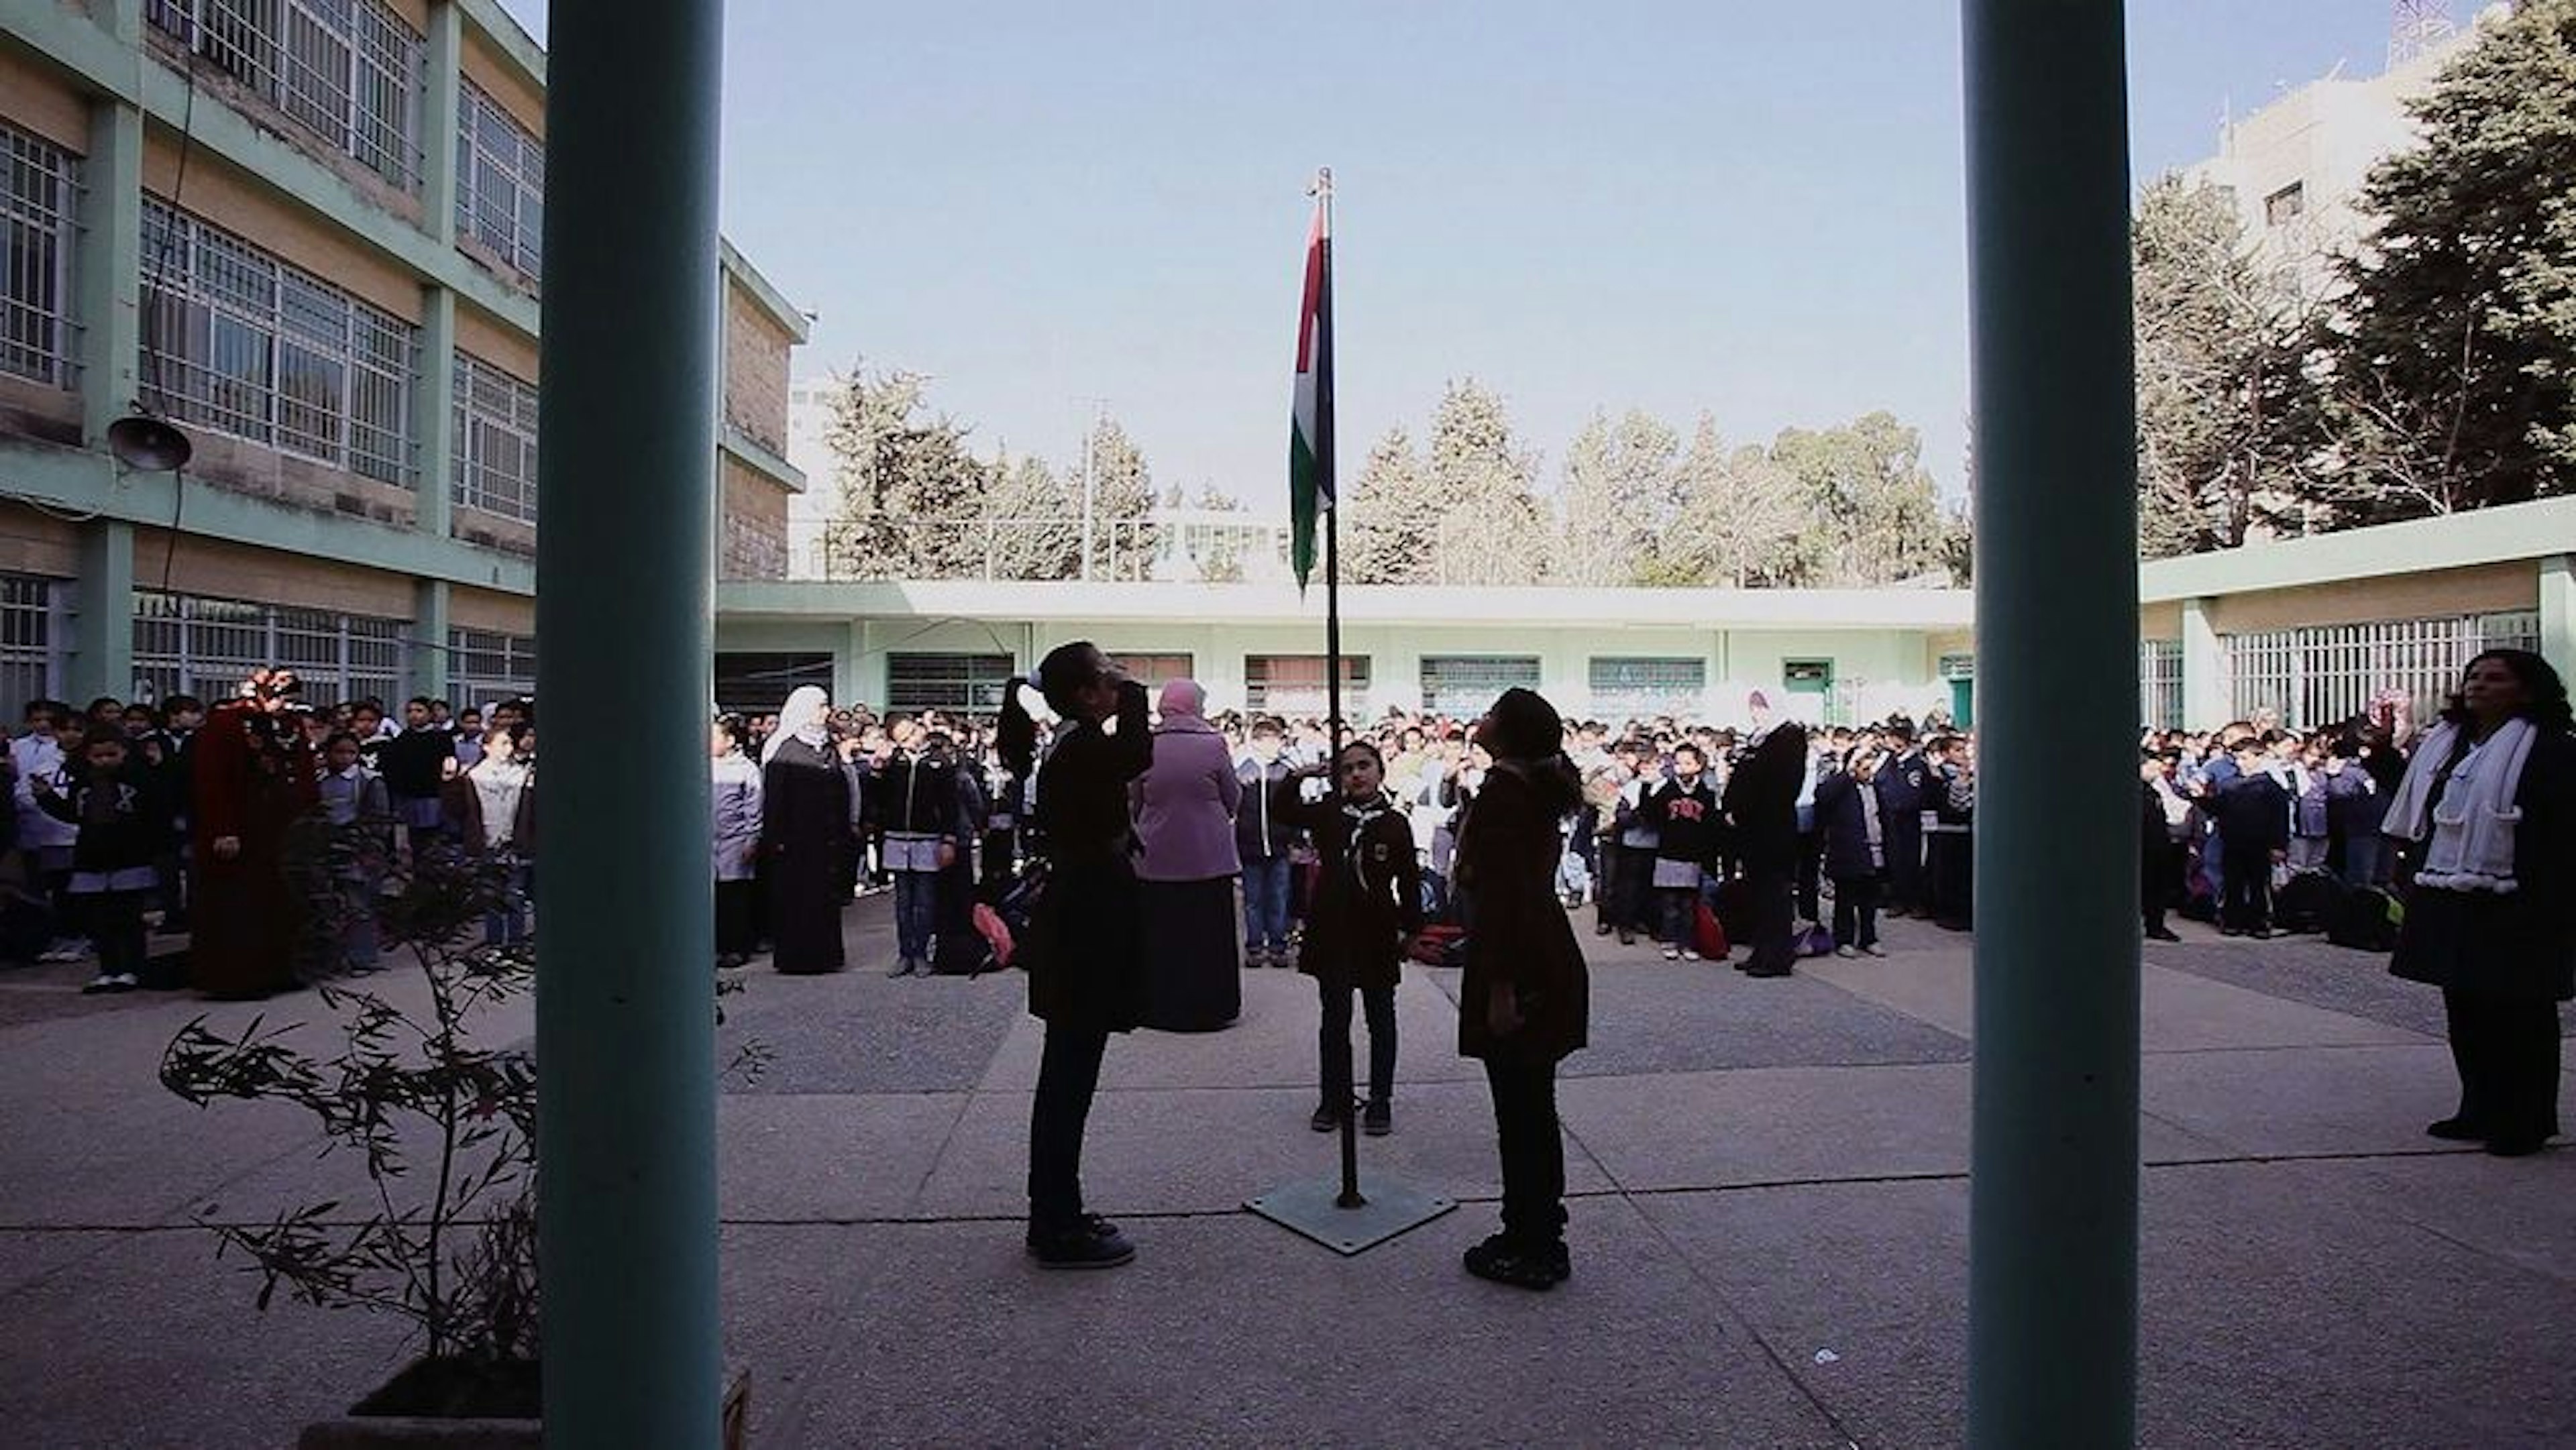 Outdoor courtyard with a crowd of people witnessing a trio of people featuring a salute to the Palestinian flag—green, red and white—set atop a flagpole. 